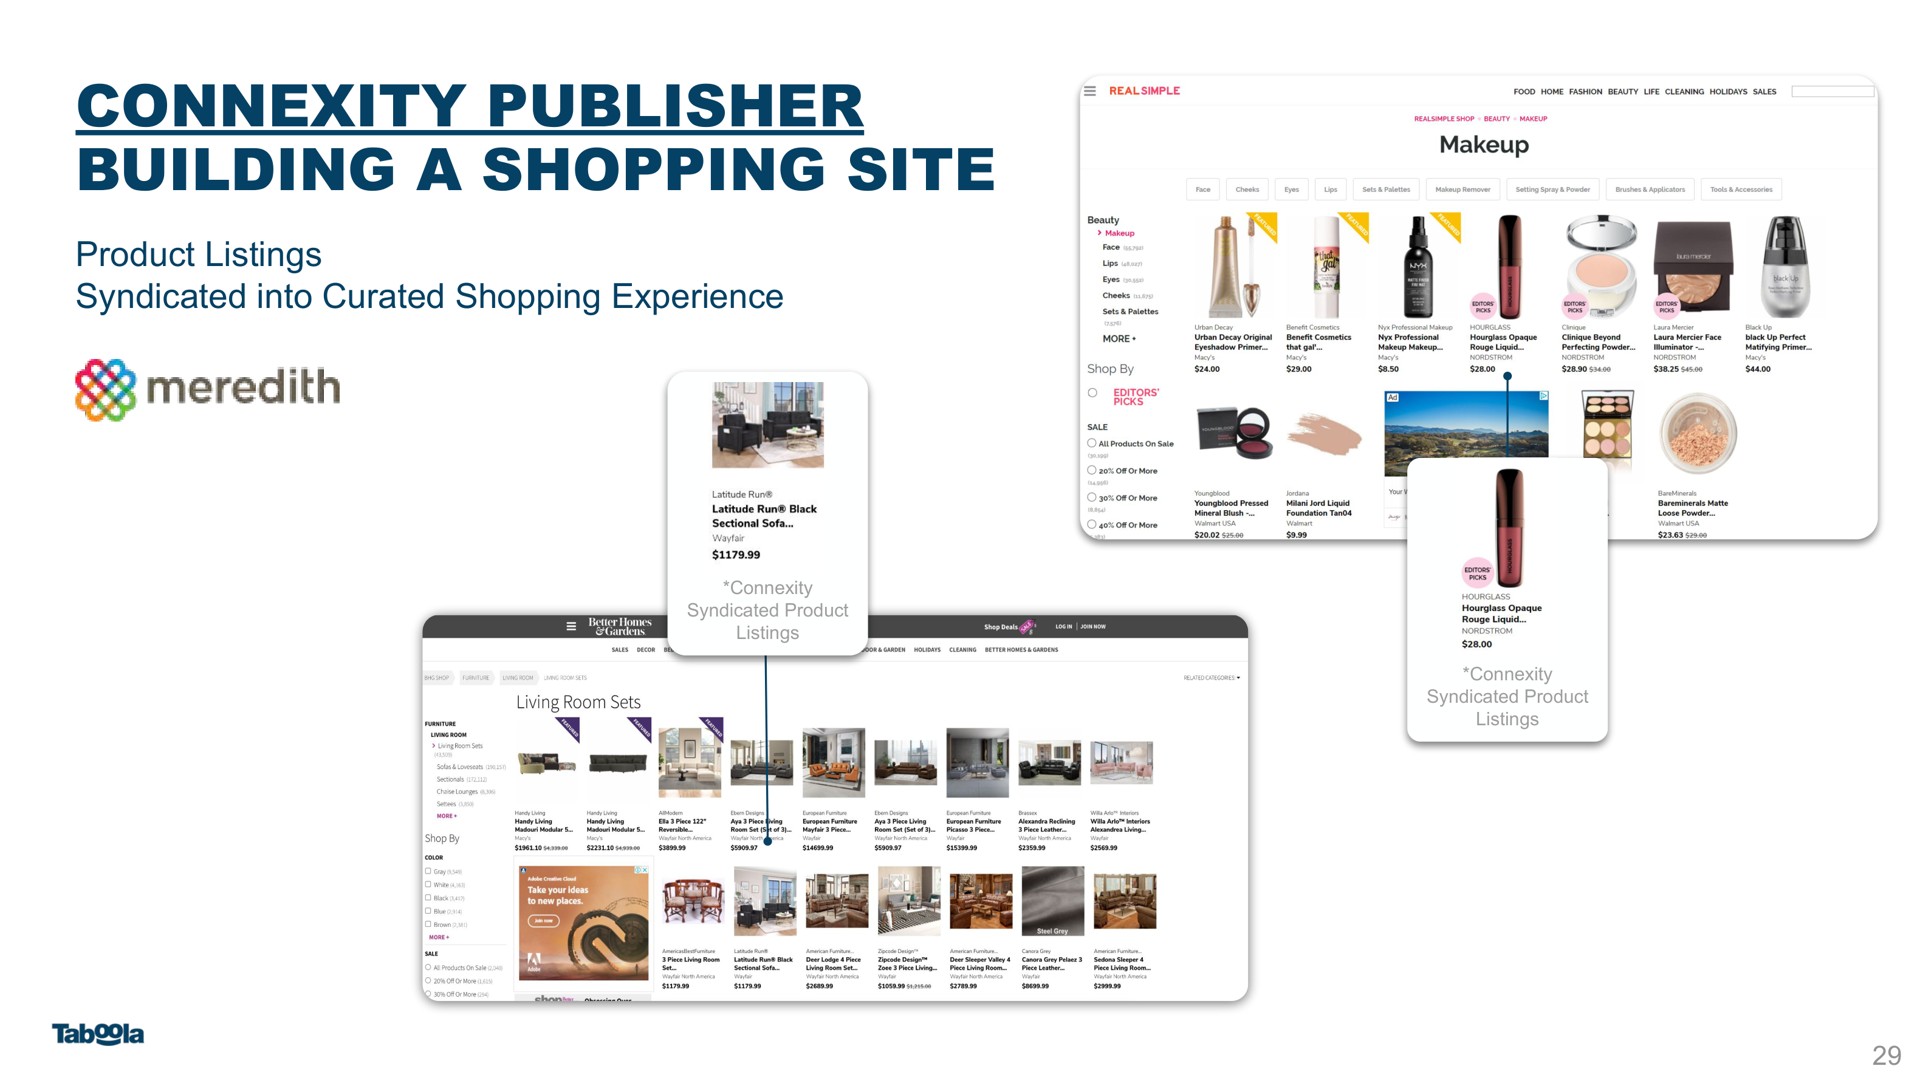 connexity publisher building a shopping site | Taboola